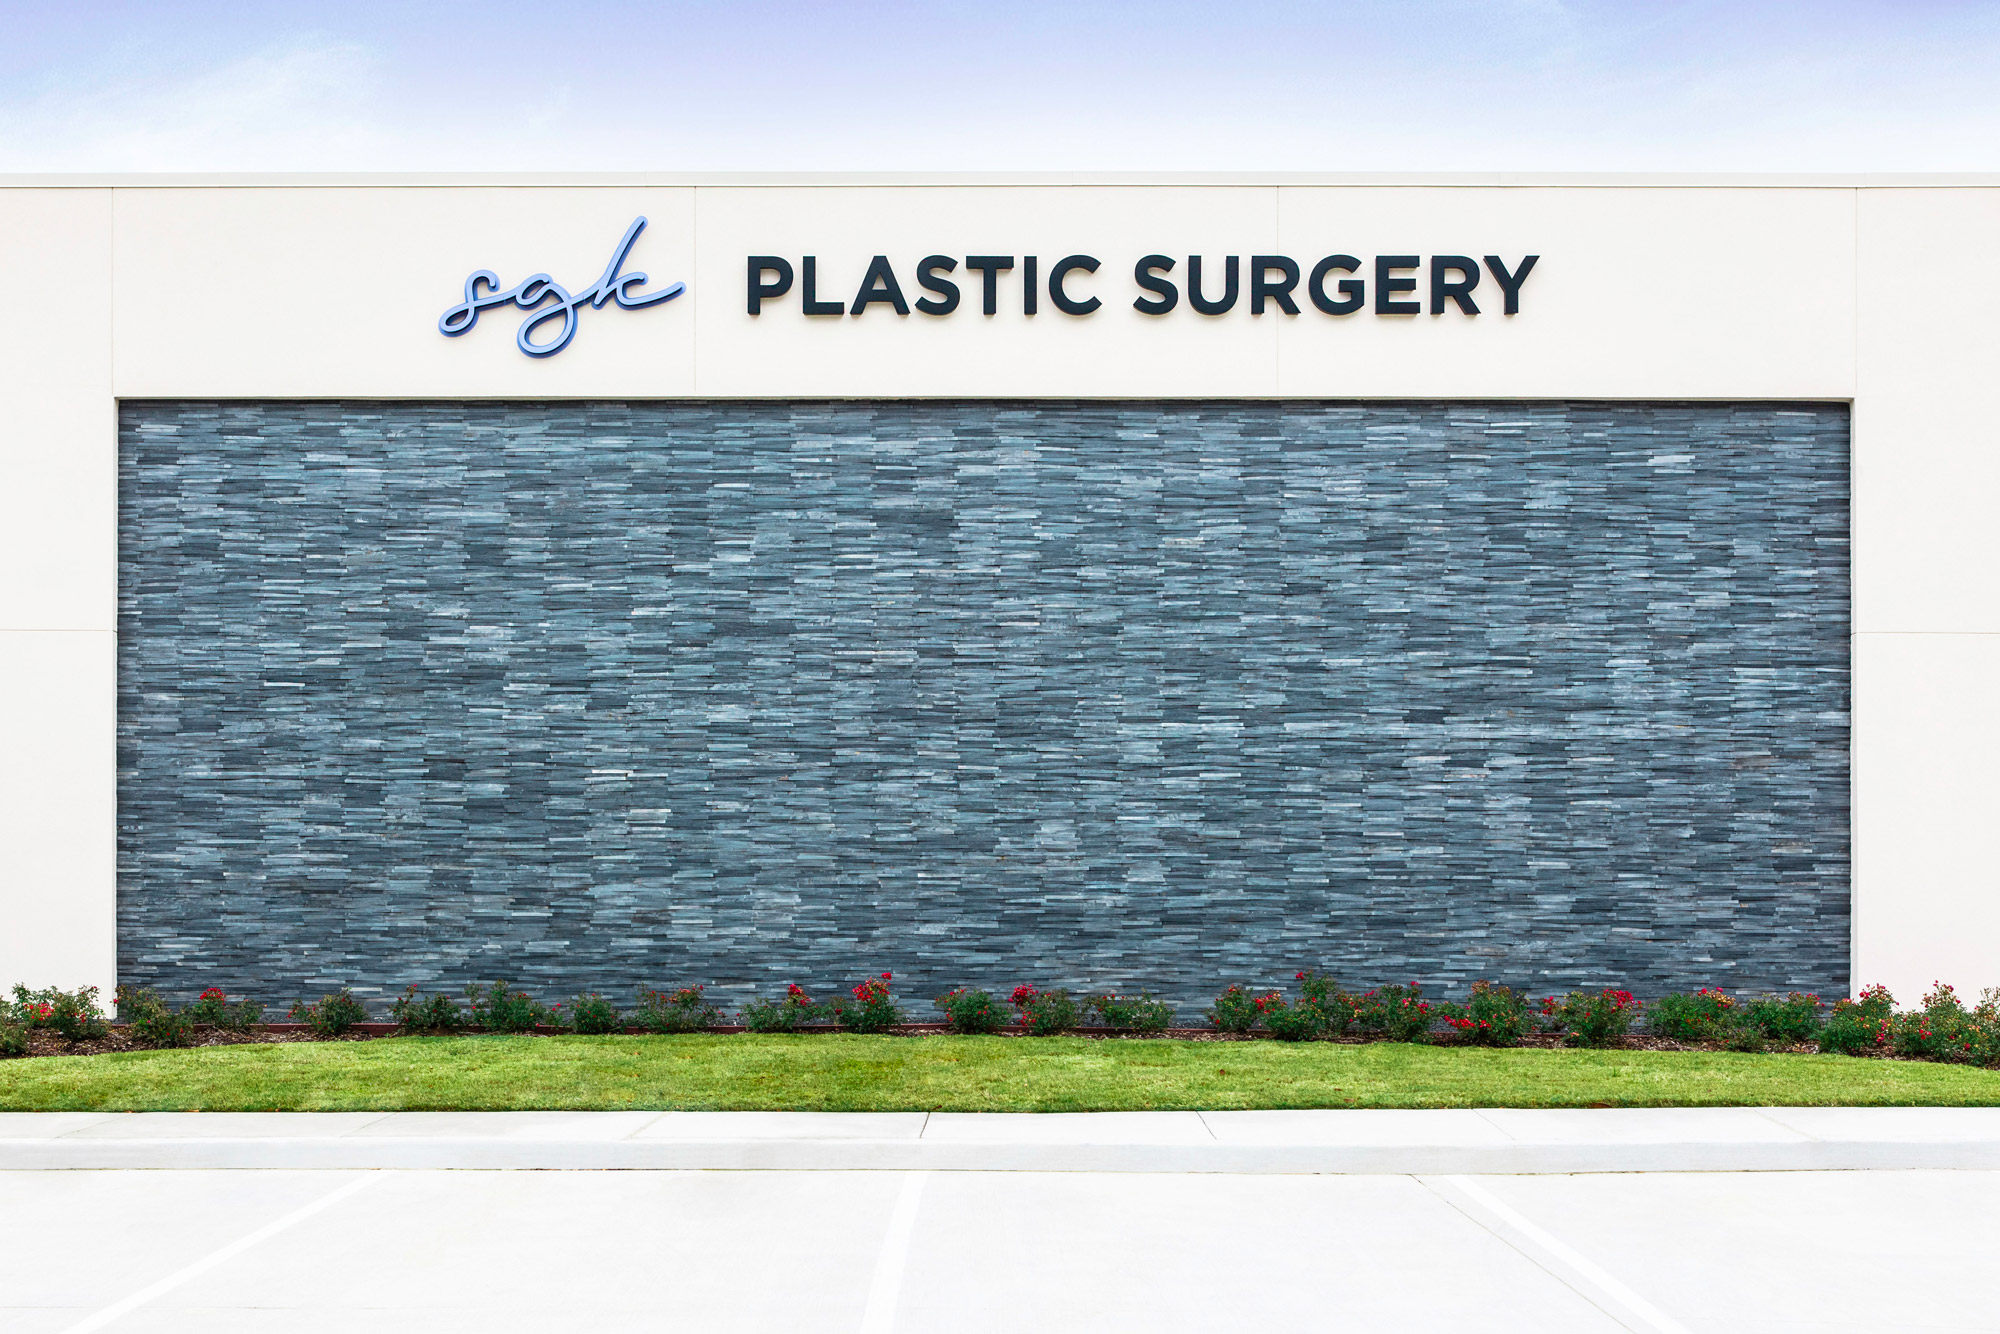 Breast Augmentation Houston Archives - The Woodlands Plastic Surgery